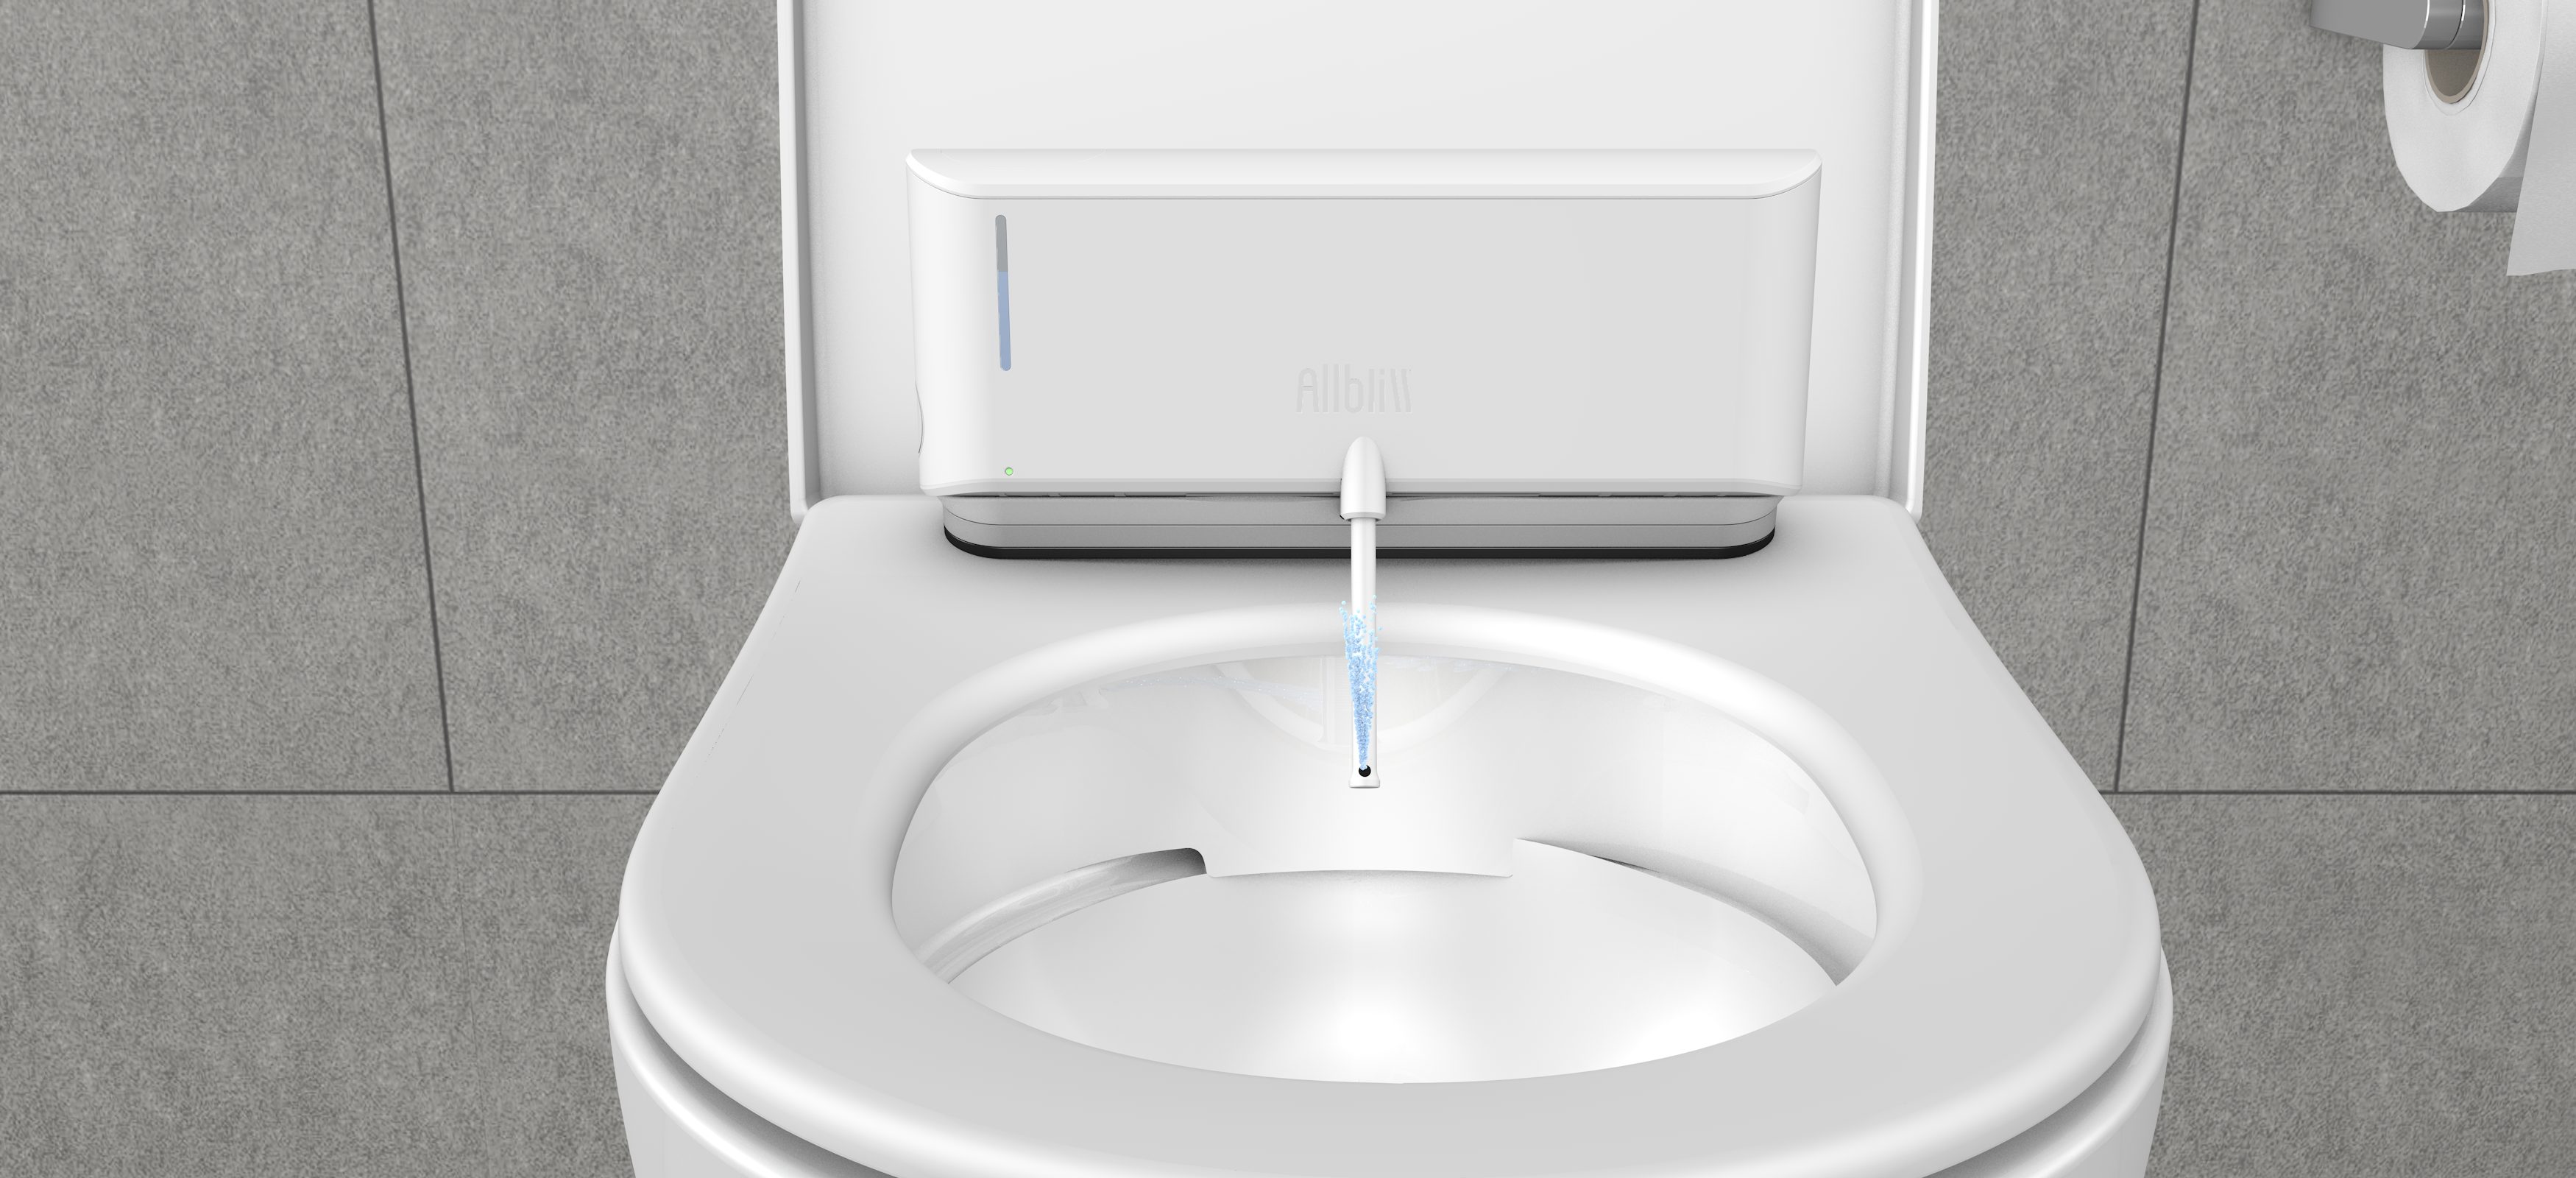 Load video: Shows how to attach AllBliss to the toilet seat.